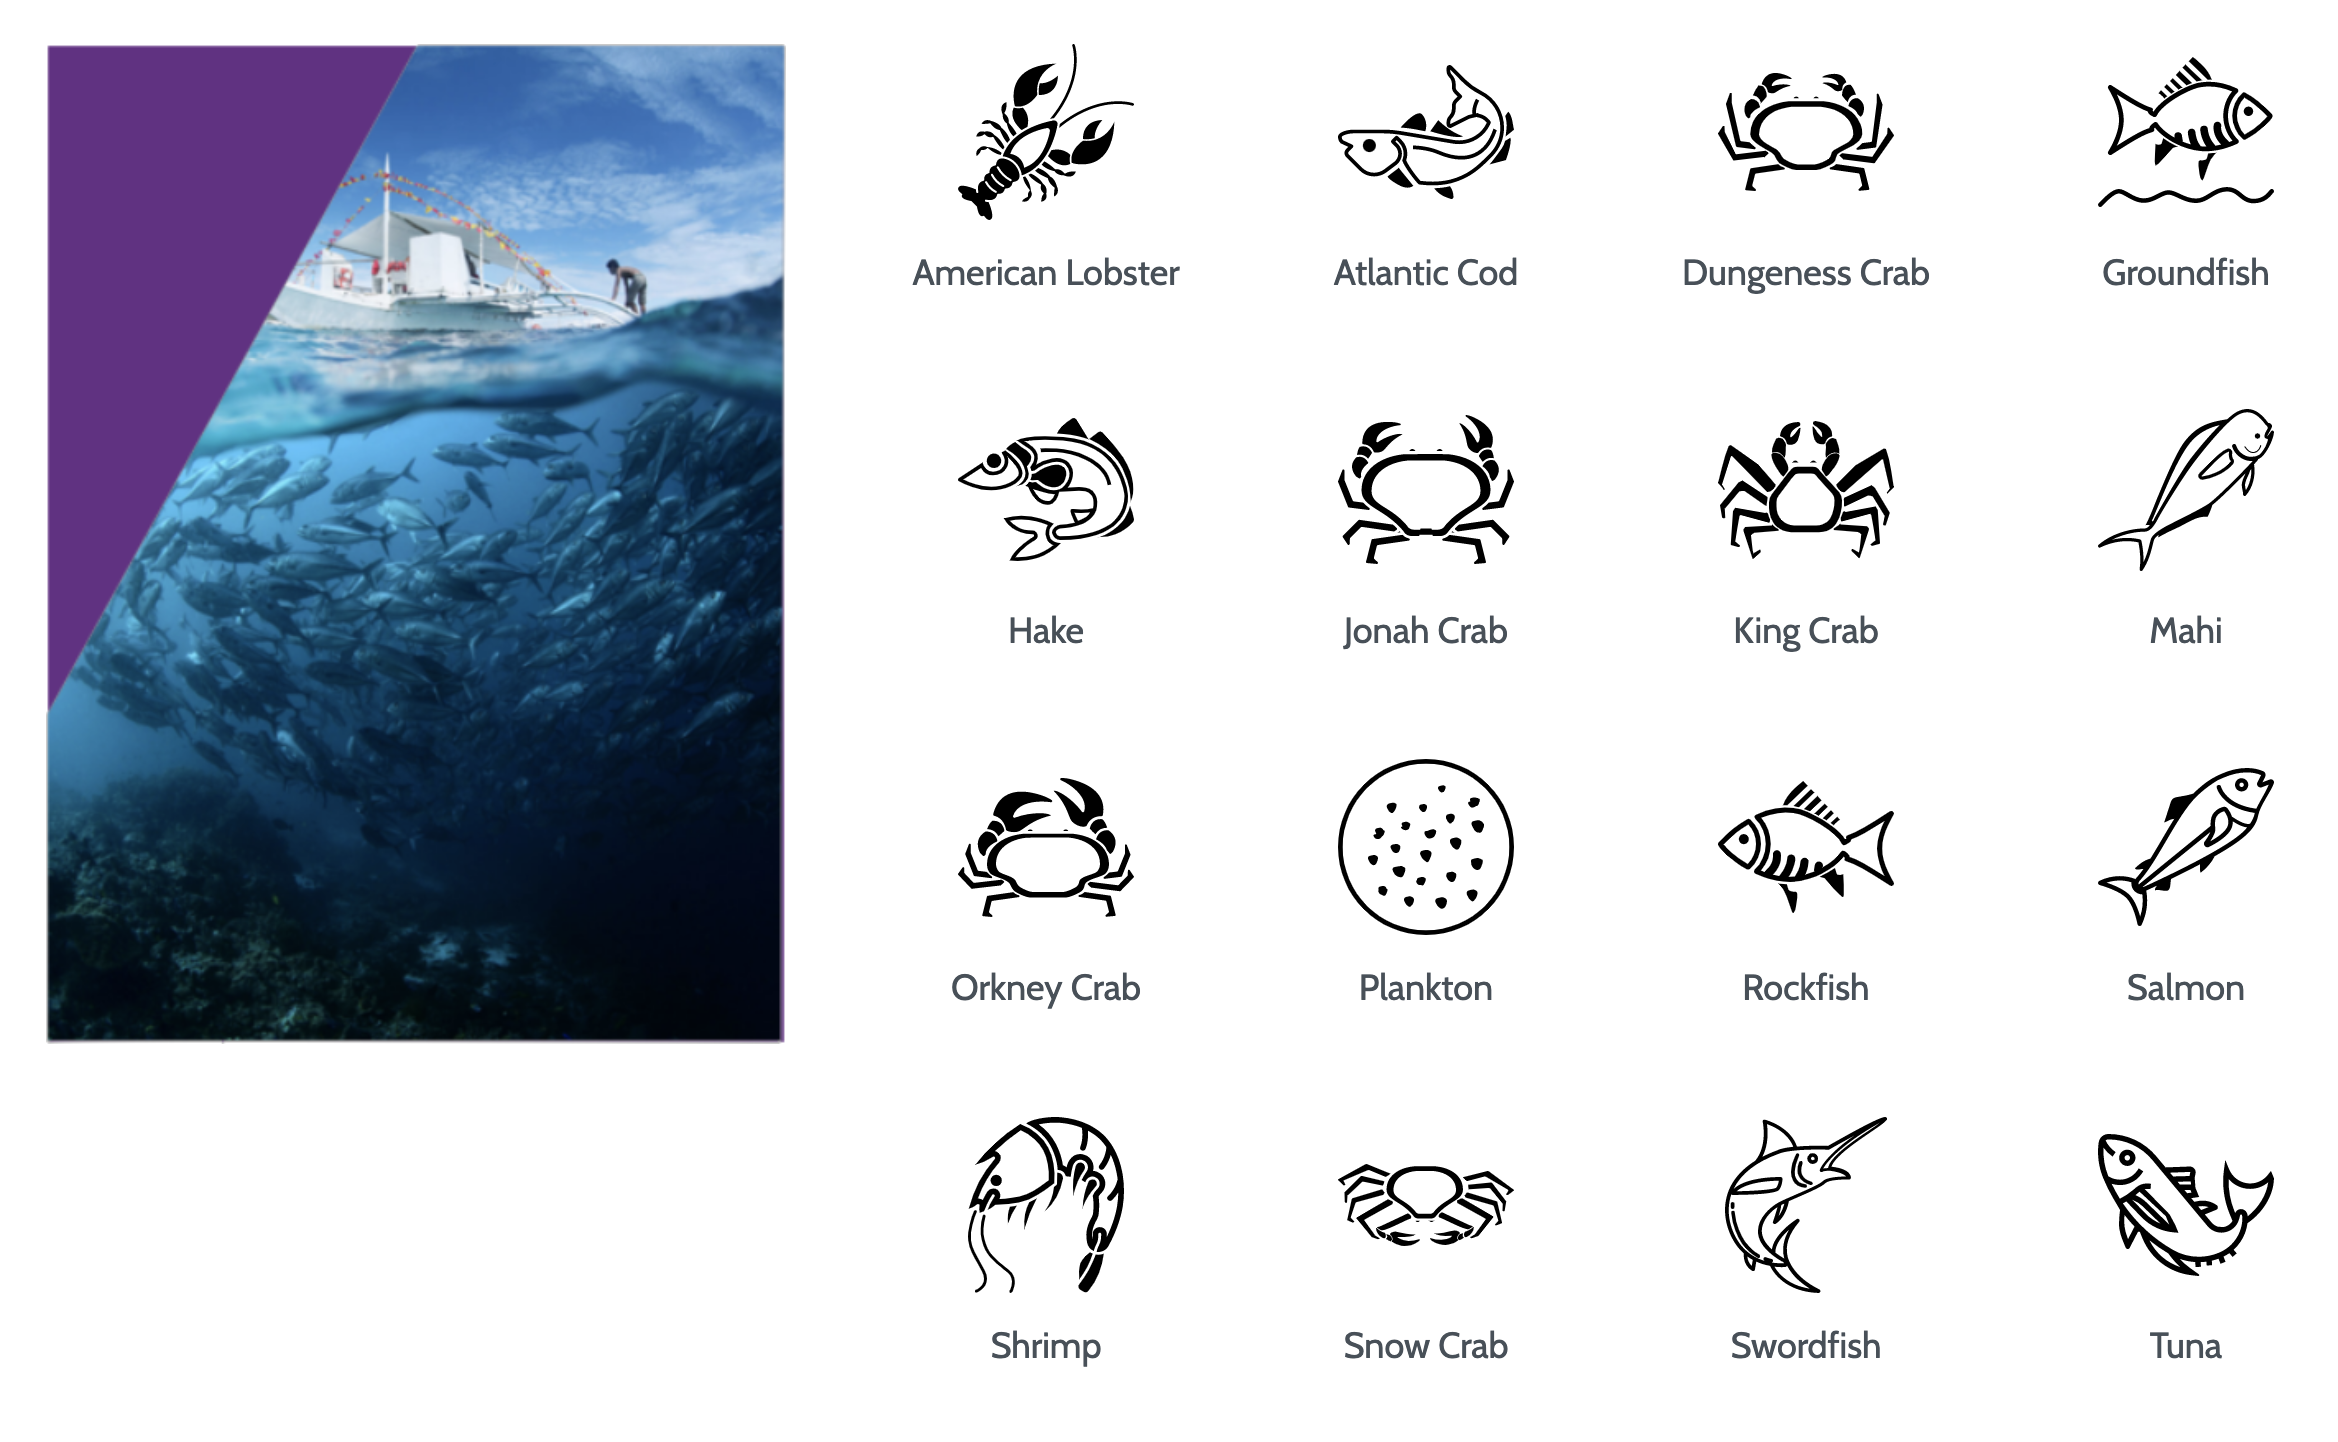 icons for 16 target species